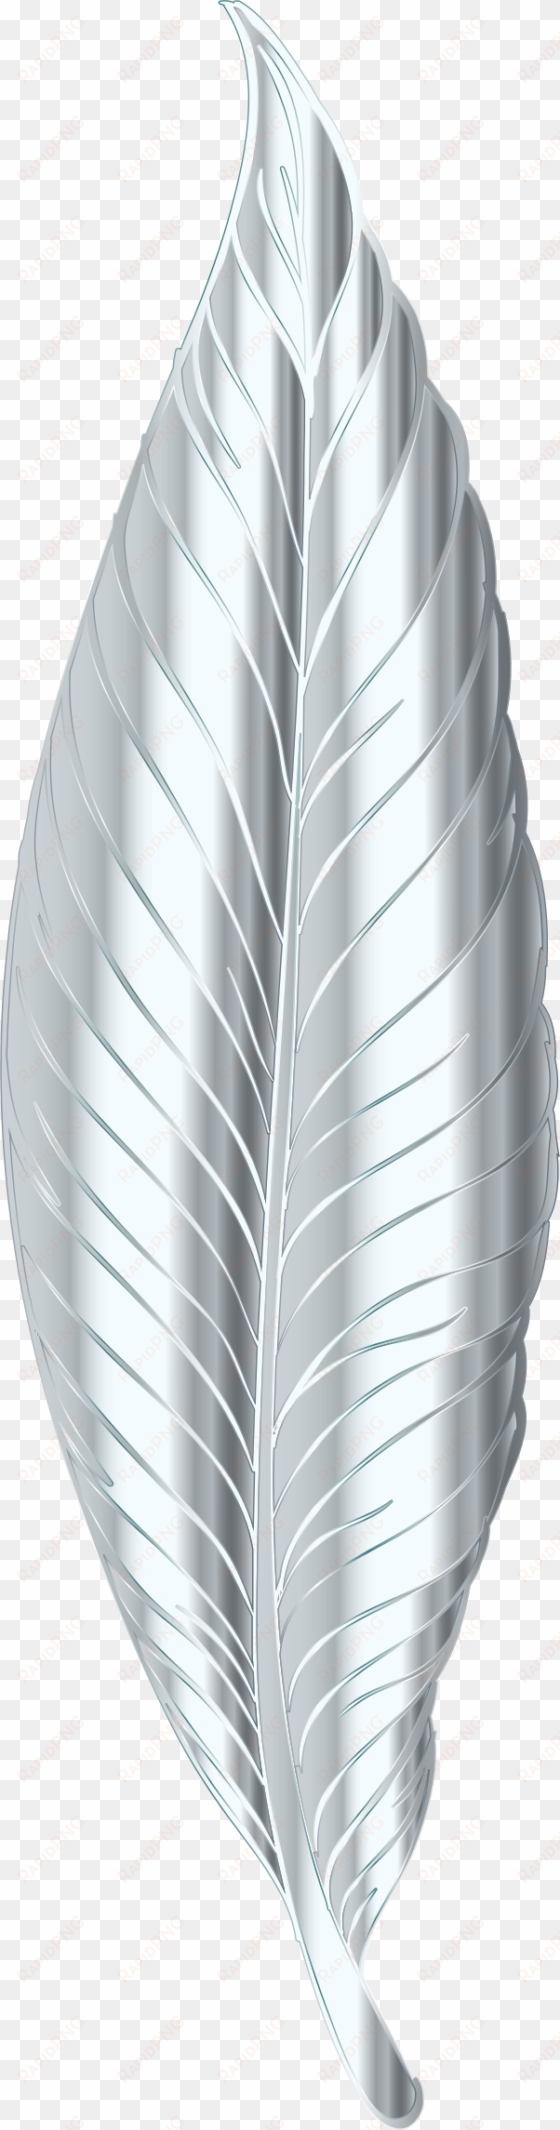 S - Silver Feather Clip Art transparent png image